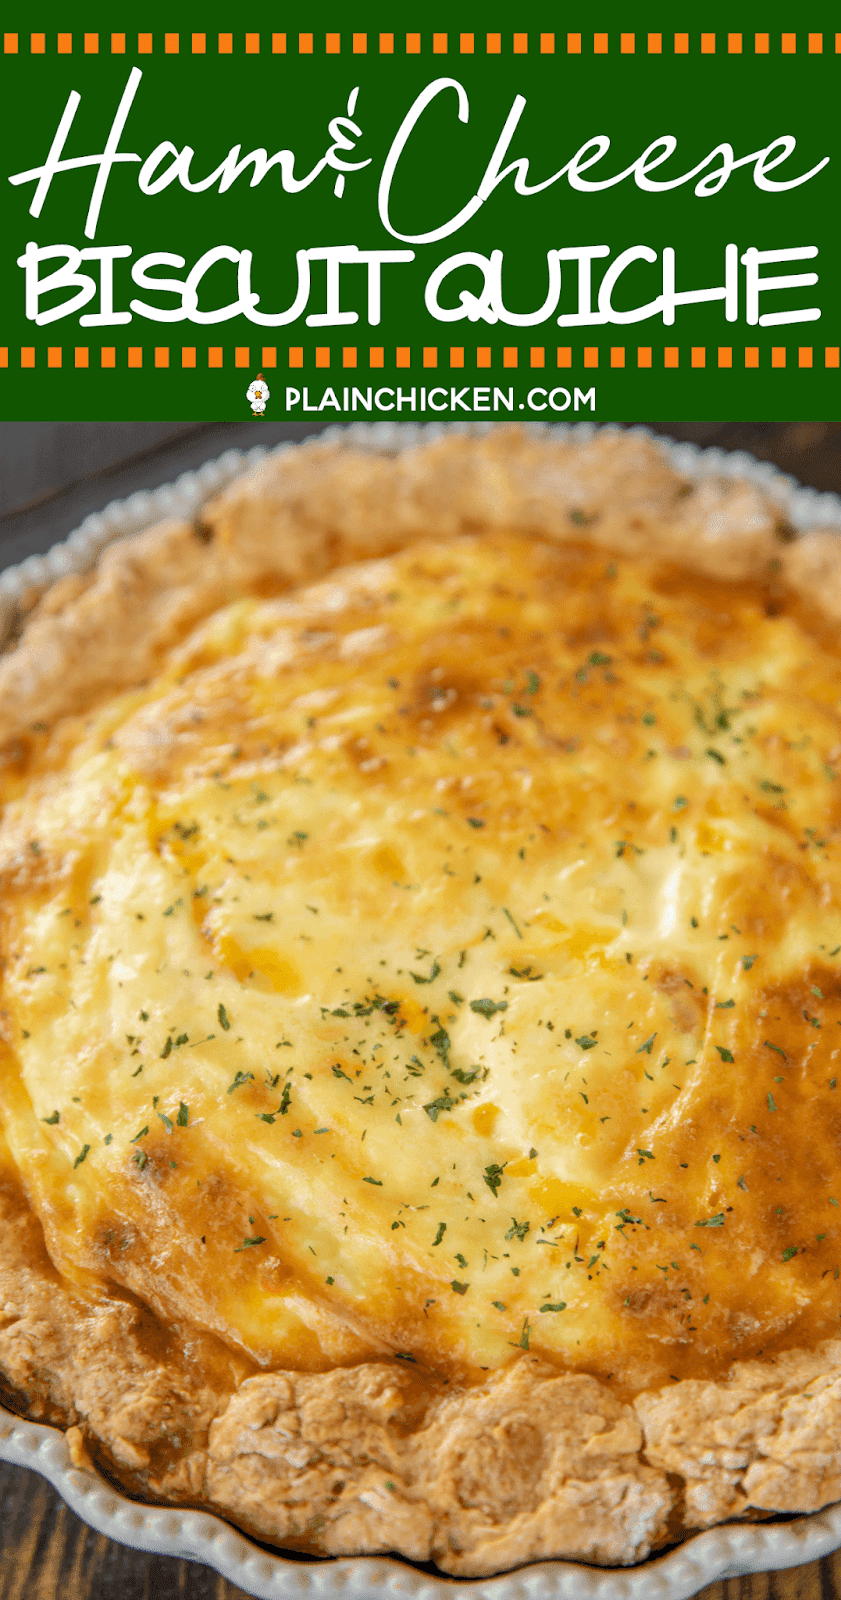 Ham and Cheese Biscuit Quiche - our FAVORITE quiche! The crust is made out of homemade biscuit dough. It is like a big open faced ham, egg and cheese biscuit. SO good!!! Self-Rising flour, butter, buttermilk, ham, cheese, eggs, half-and-half and sour cream. Great for breakfast, lunch or dinner. Everyone LOVES this yummy casserole!!! #quiche #breakfast #biscuit #ham